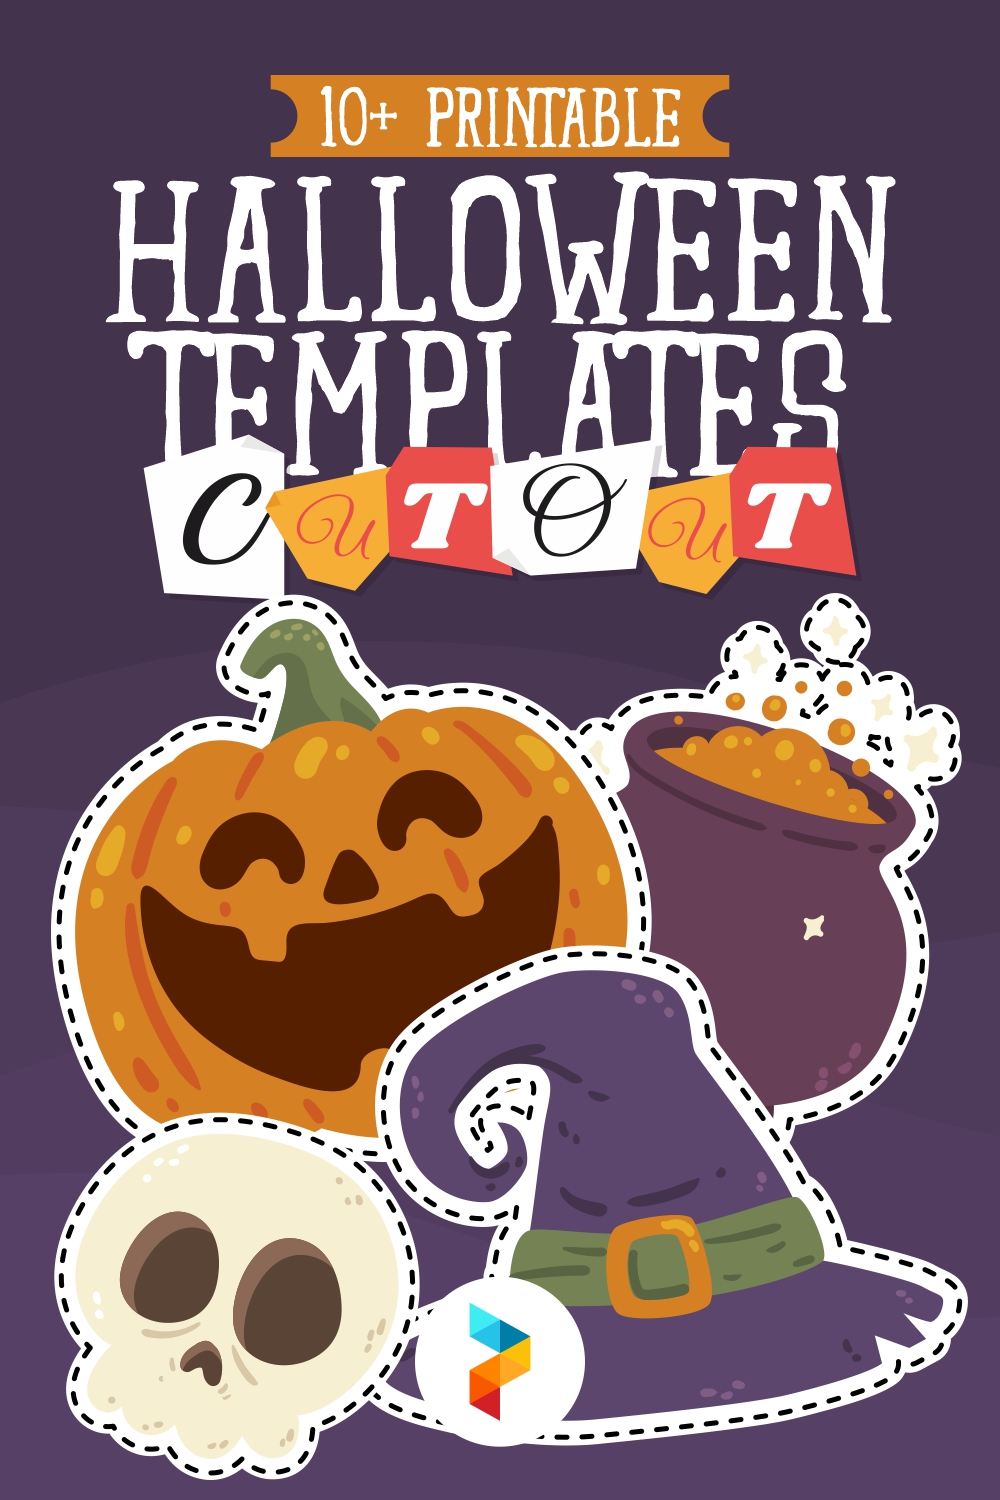 Printable Halloween Templates Cut Out